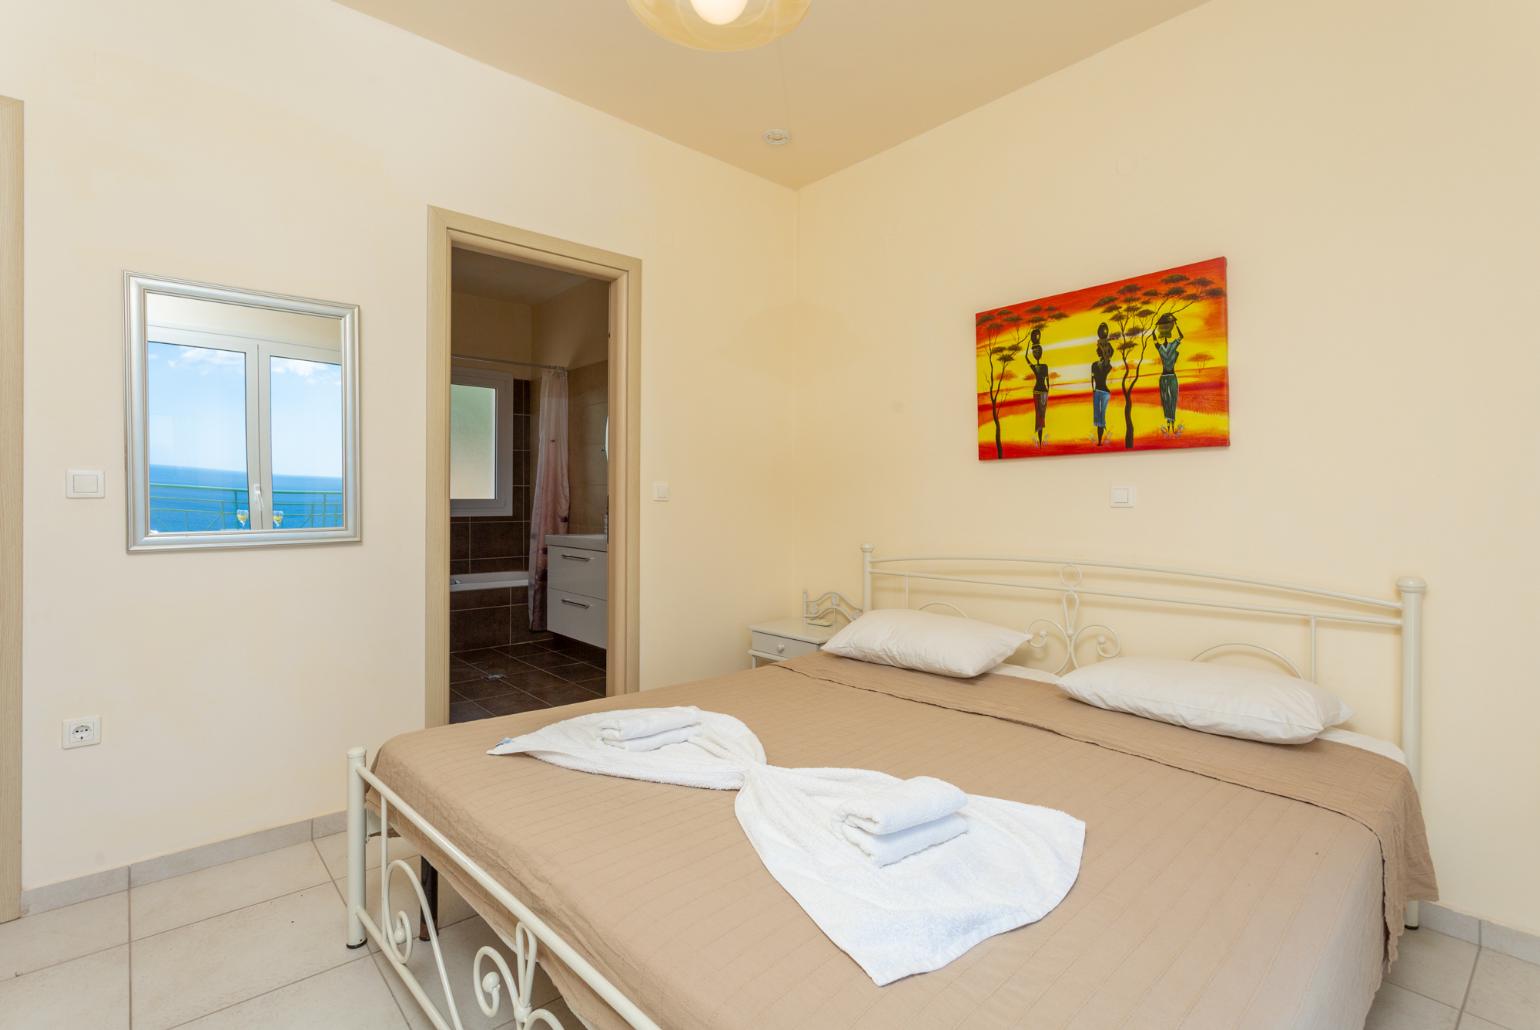 Double bedroom with en suite bathroom, A/C, and upper terrace access with panoramic sea views